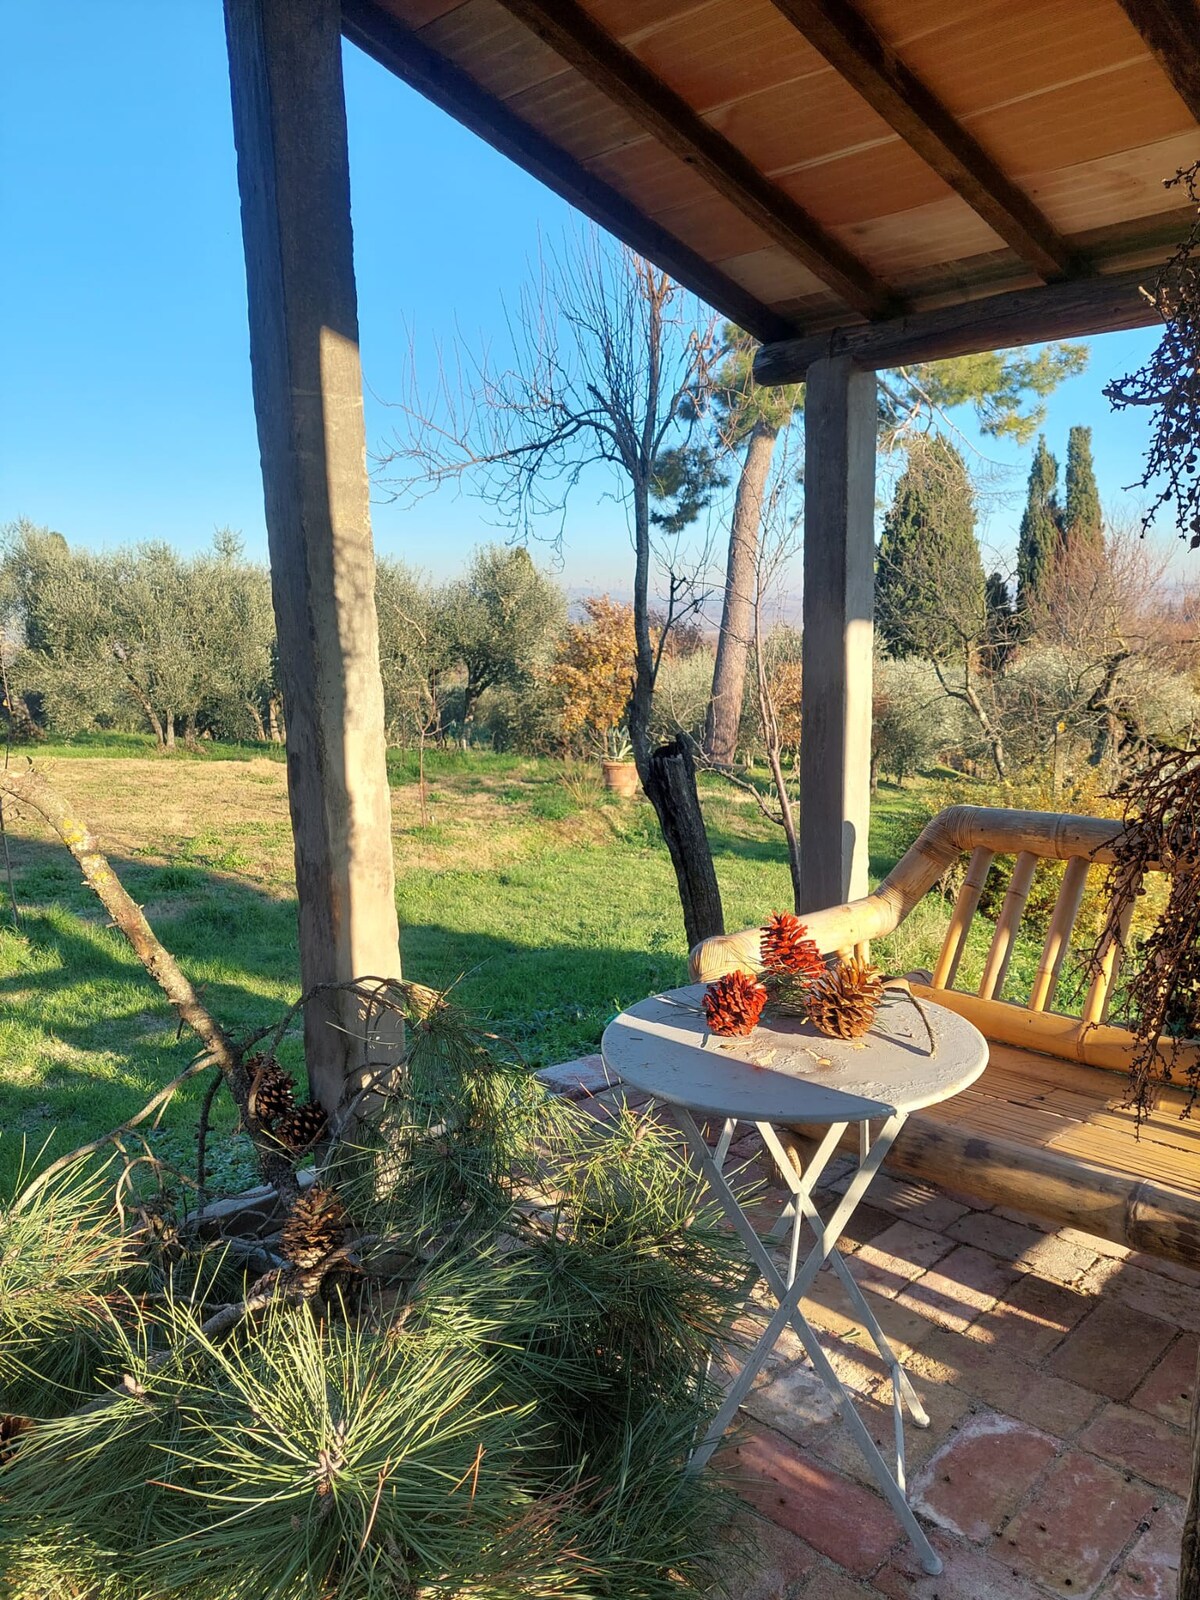 Villa in Tuscany for rent